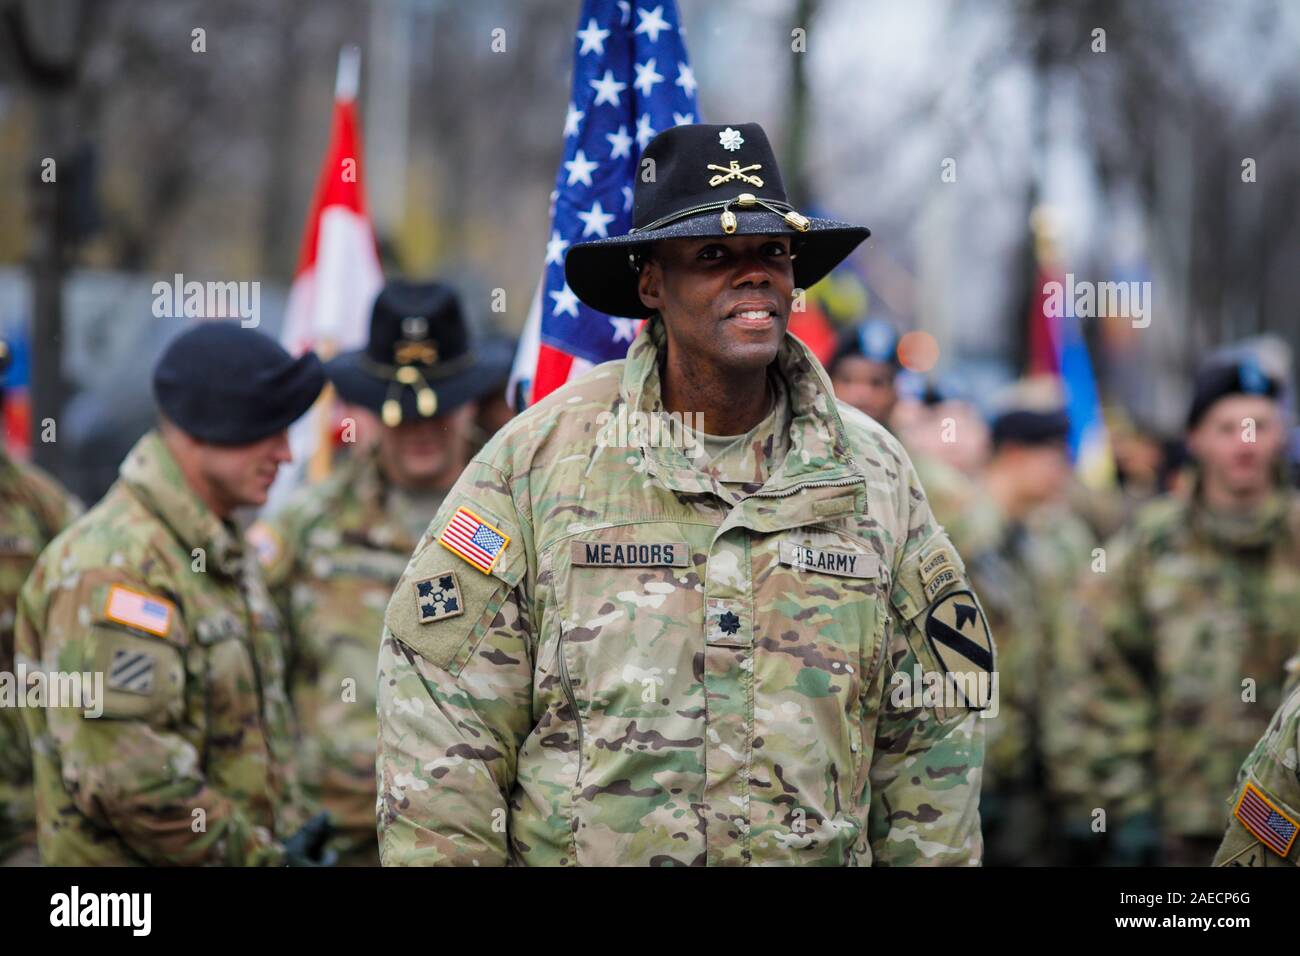 Bucharest, Romania - December 01, 2019: US Army soldiers of the 1st Cavalry Division take part at the Romanian National Day military parade. Stock Photo